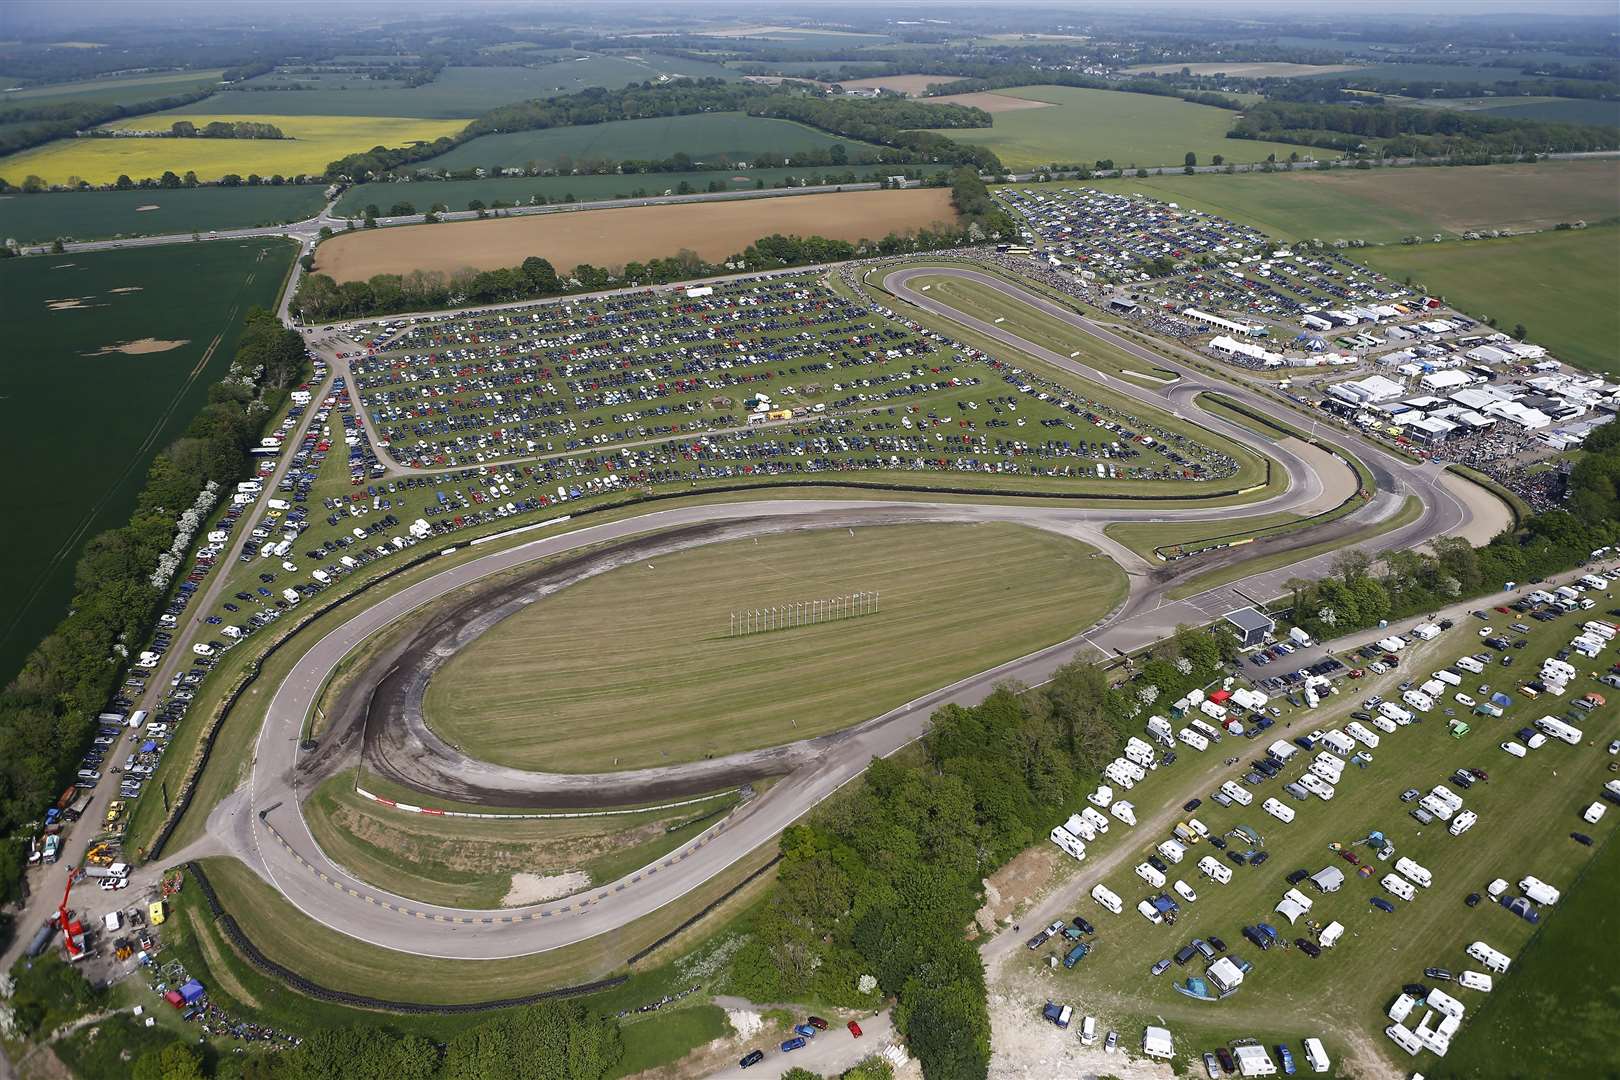 A motorcyclist died during a track day event at Lydden Hill Race Circuit